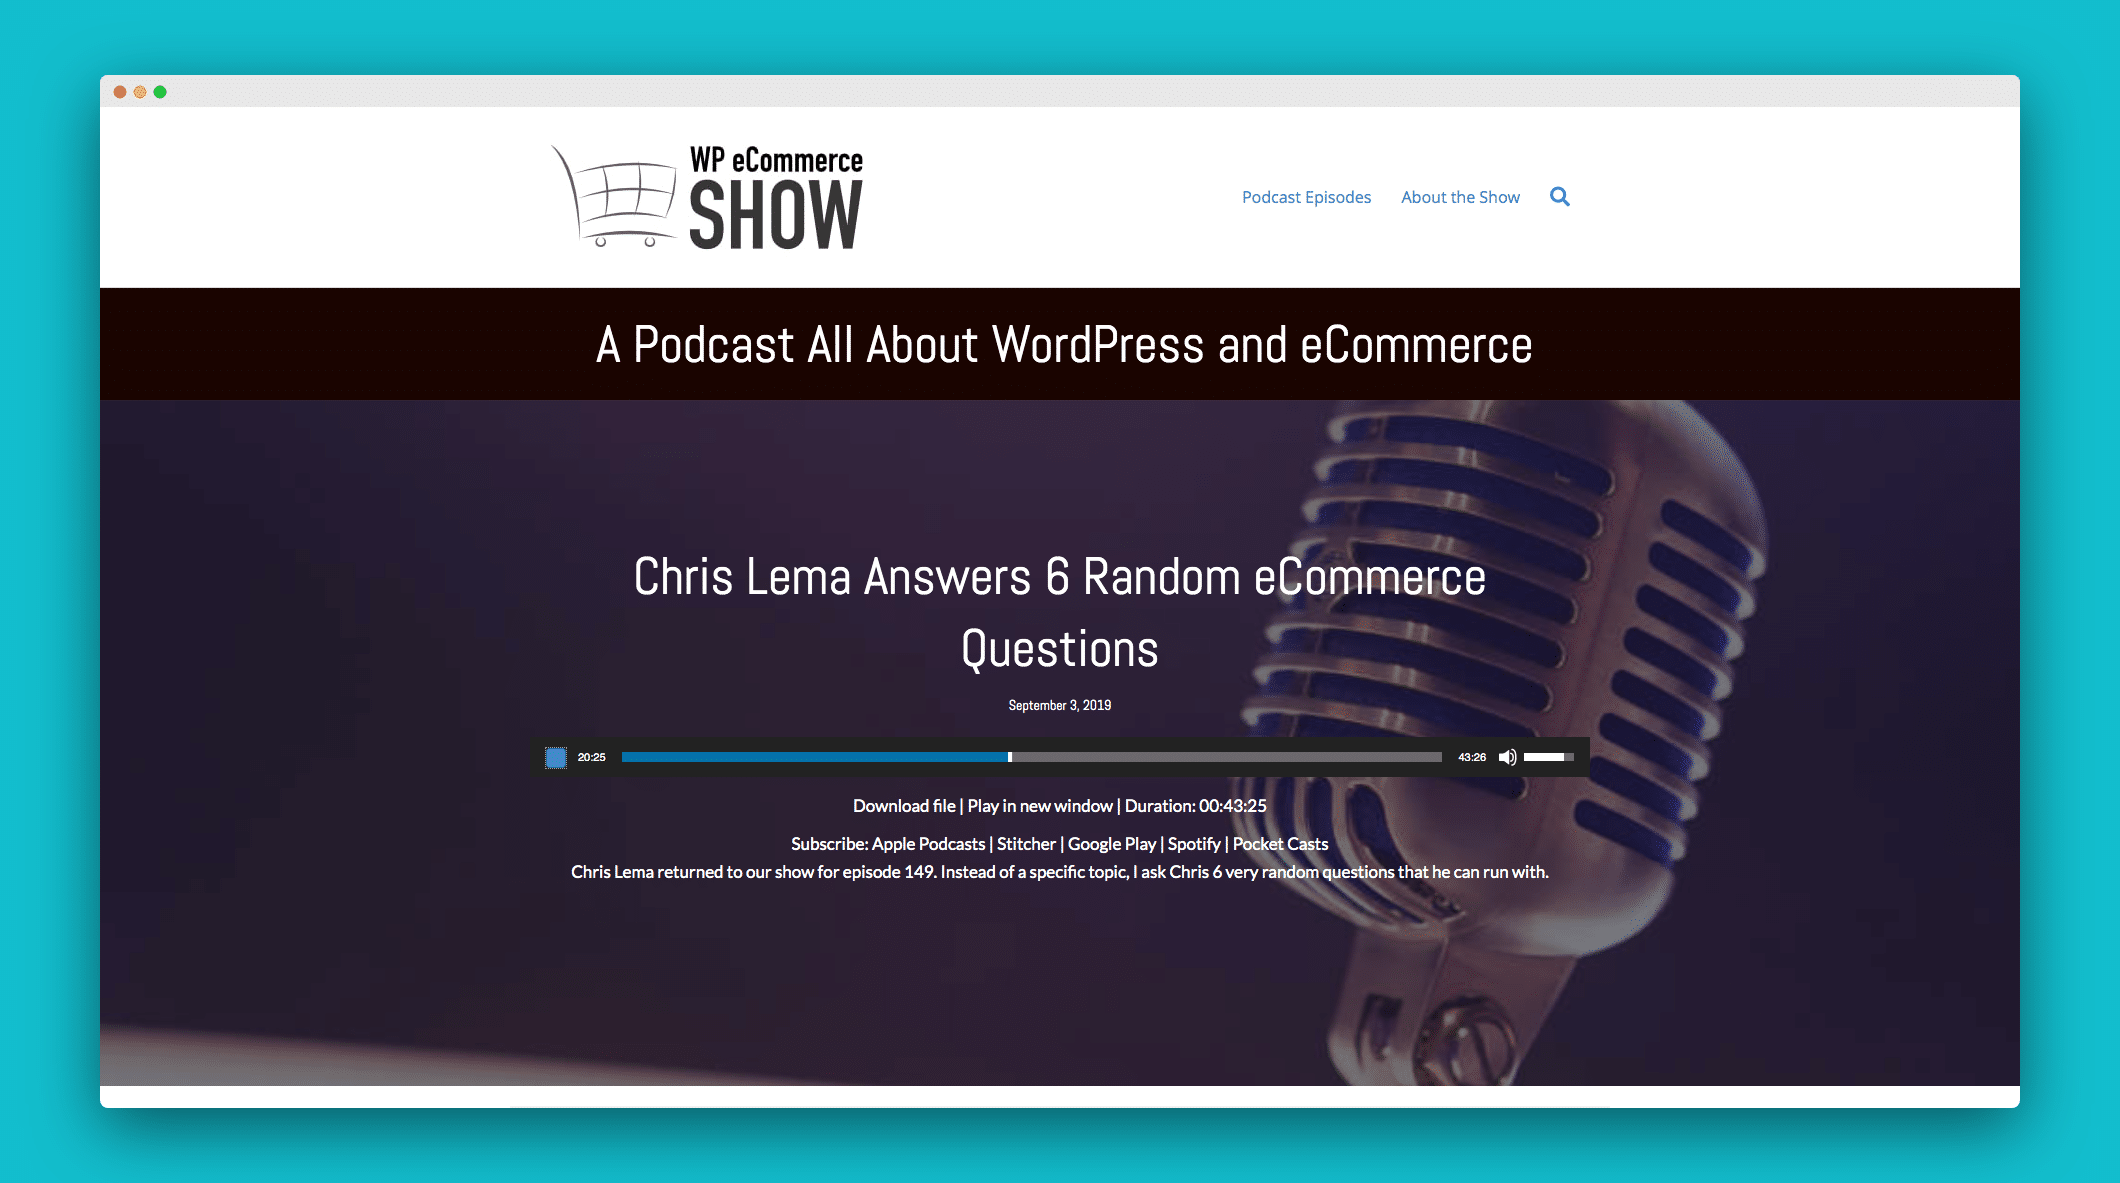 Chris Lema discusses the Pootlepress WooBuilder Blocks plugin on the WP Ecommerce Show podcast